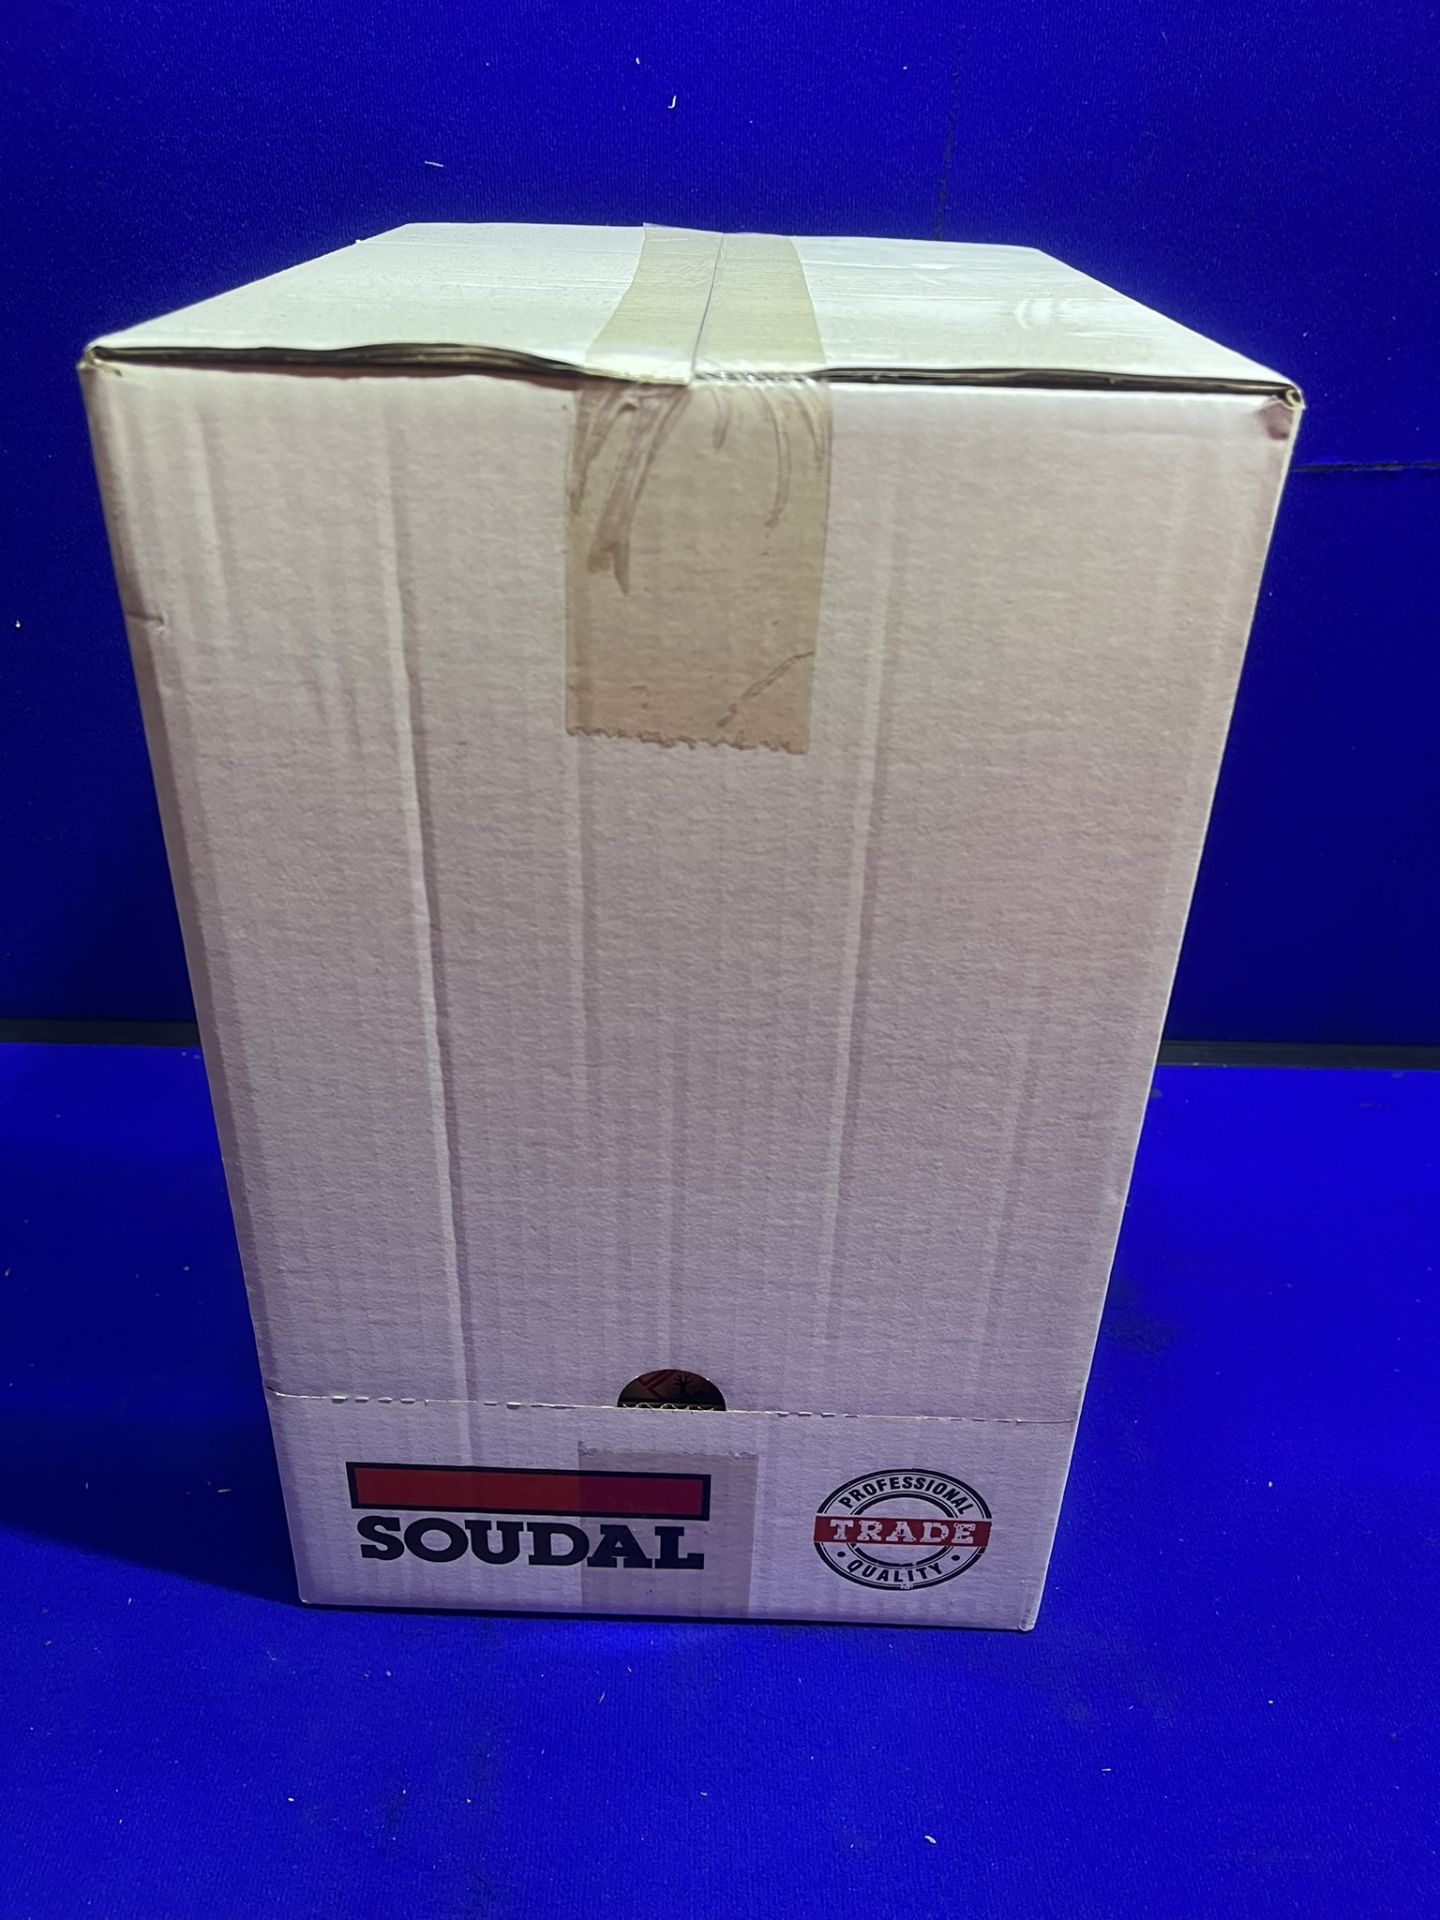 12 x 750ML Cans Of Soudal Gap Filler Expanding Foam - Image 2 of 6